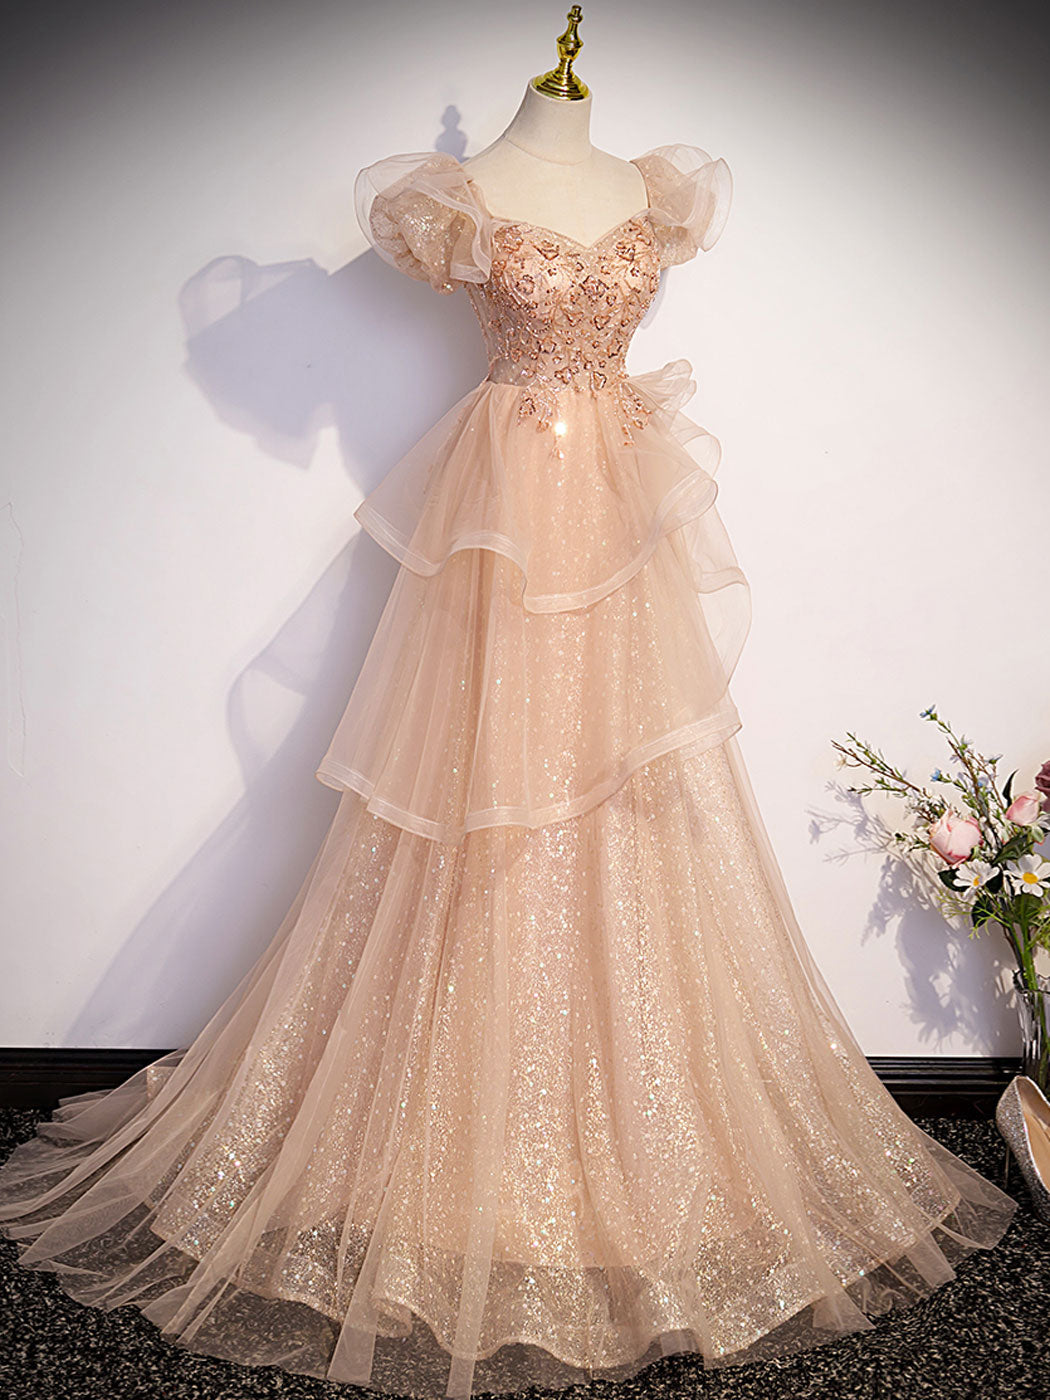 Asymmetrical Queen Anne Neck Champagne Lace Prom Dress - DollyGown